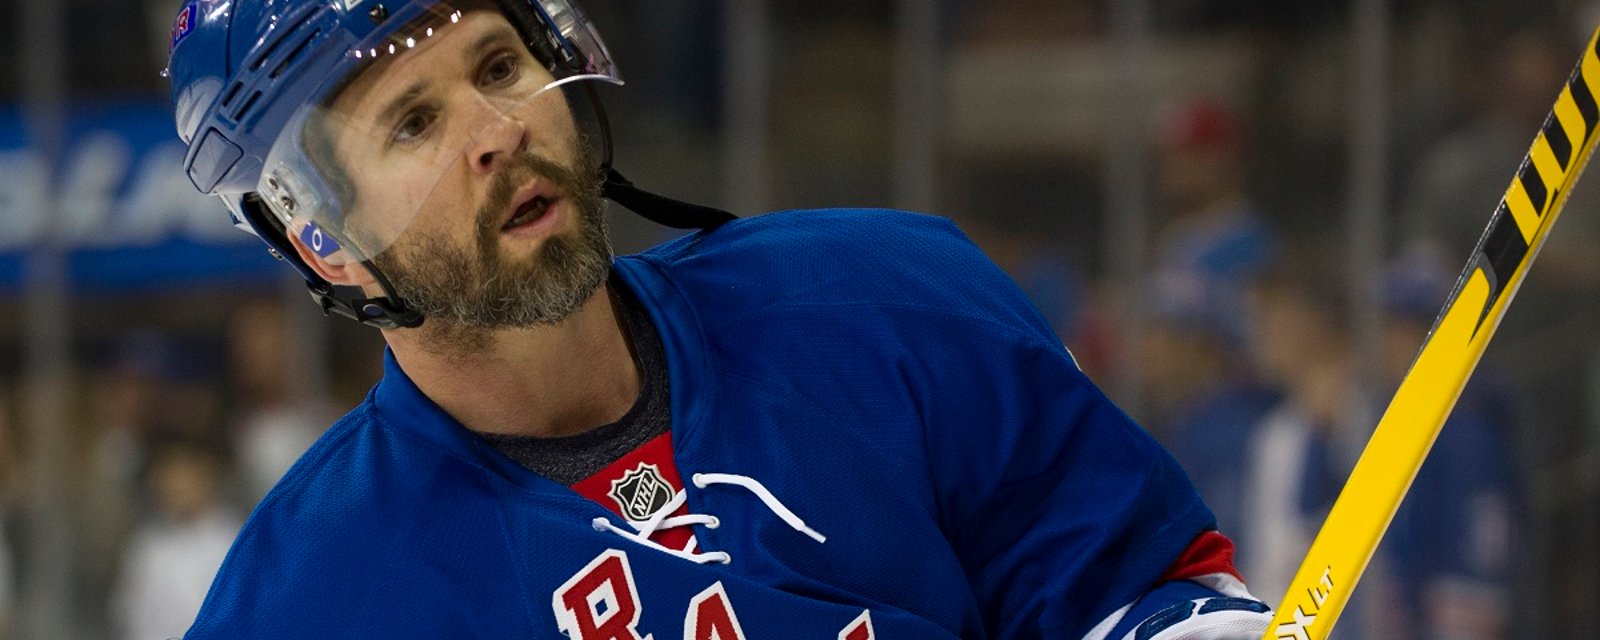 Breaking: Martin St. Louis is back in the NHL!